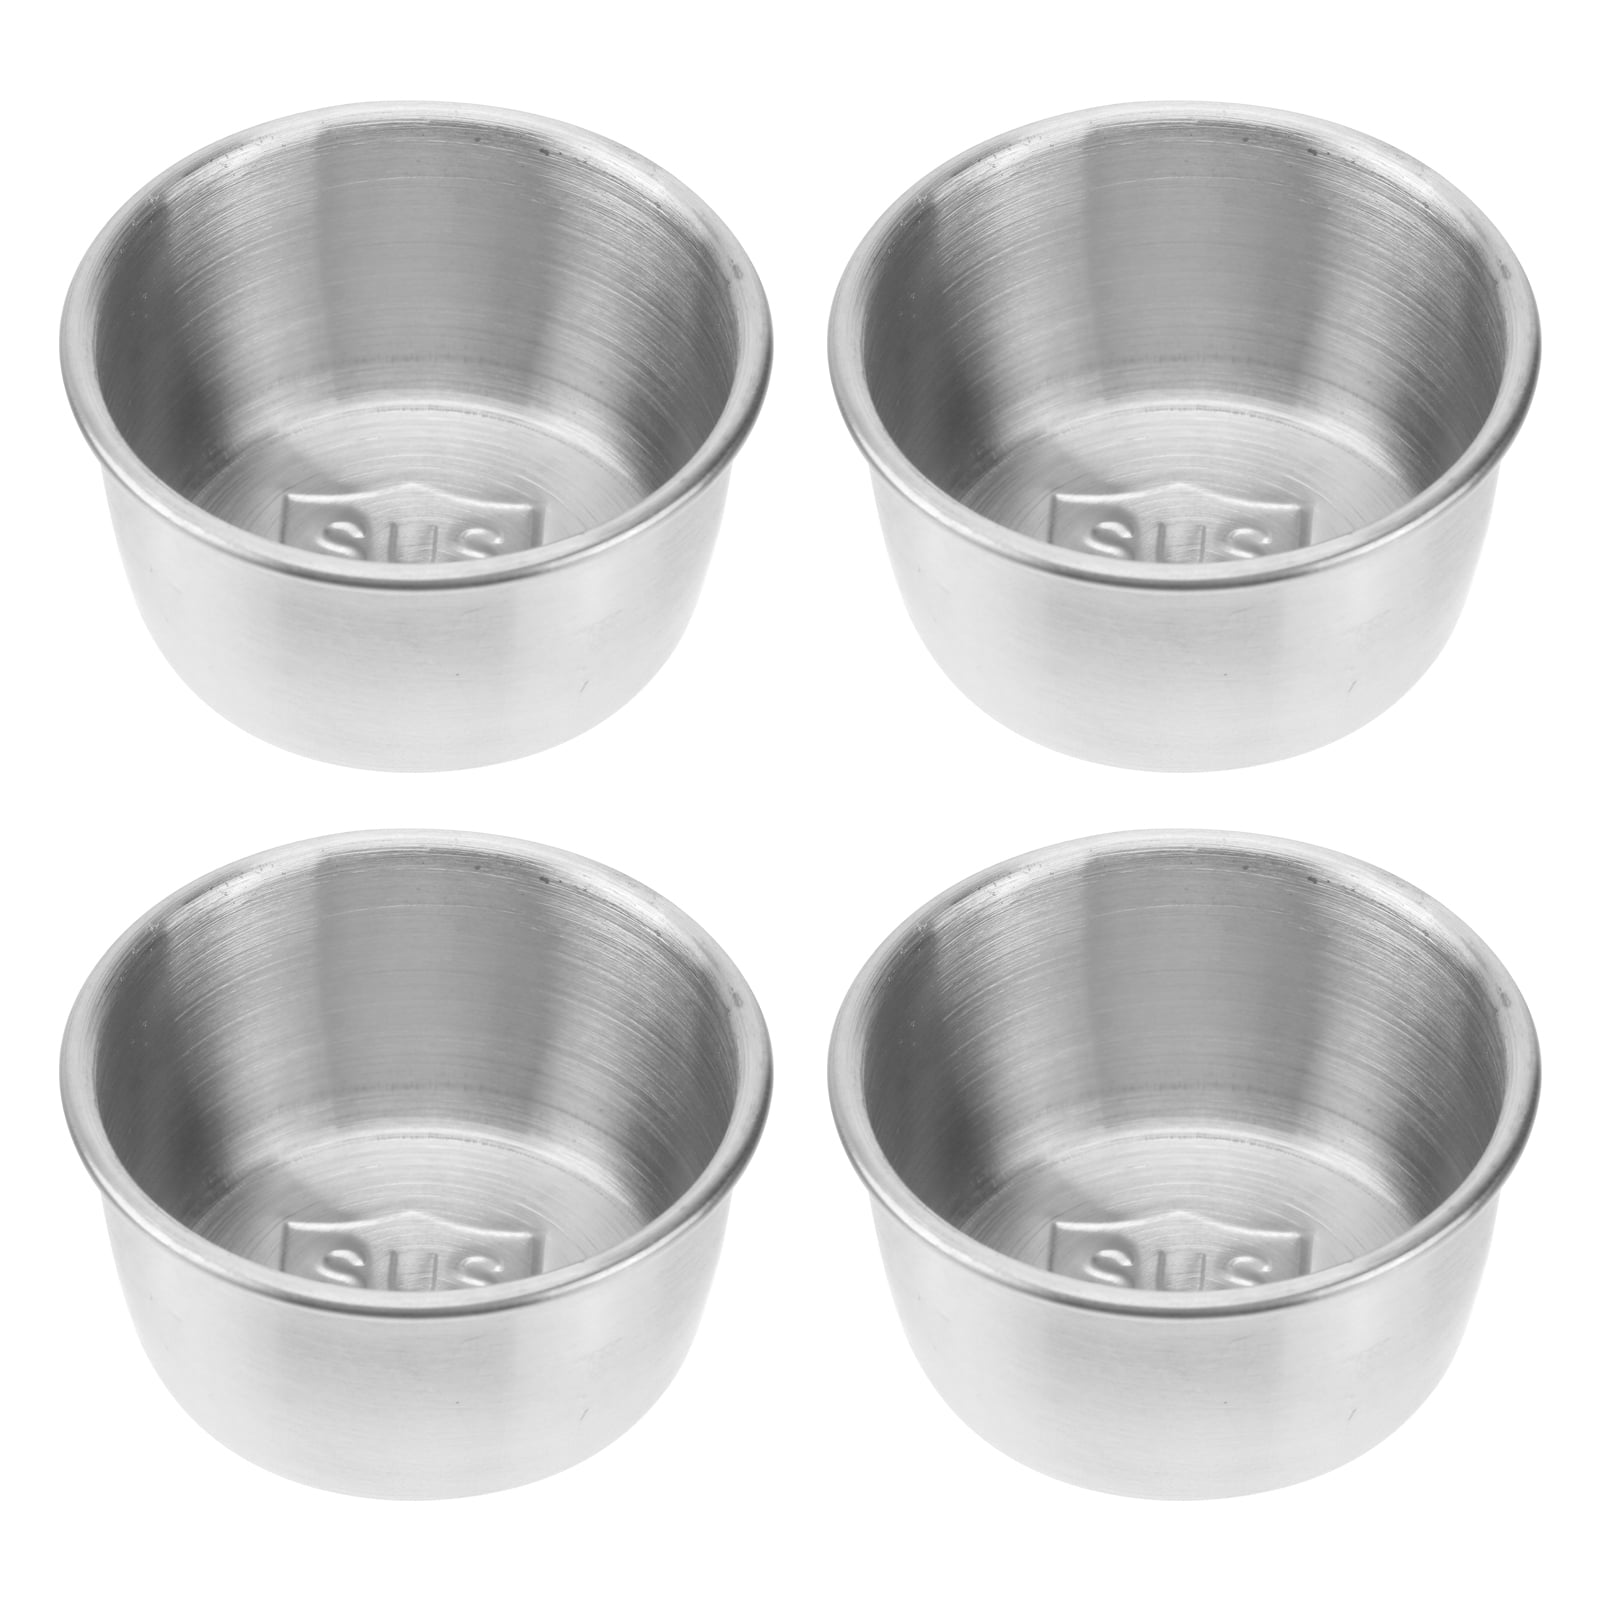 4pcs Stainless Steel Hot Pot Dipping Bowl Sauce Cup Appetizer Plates Container 